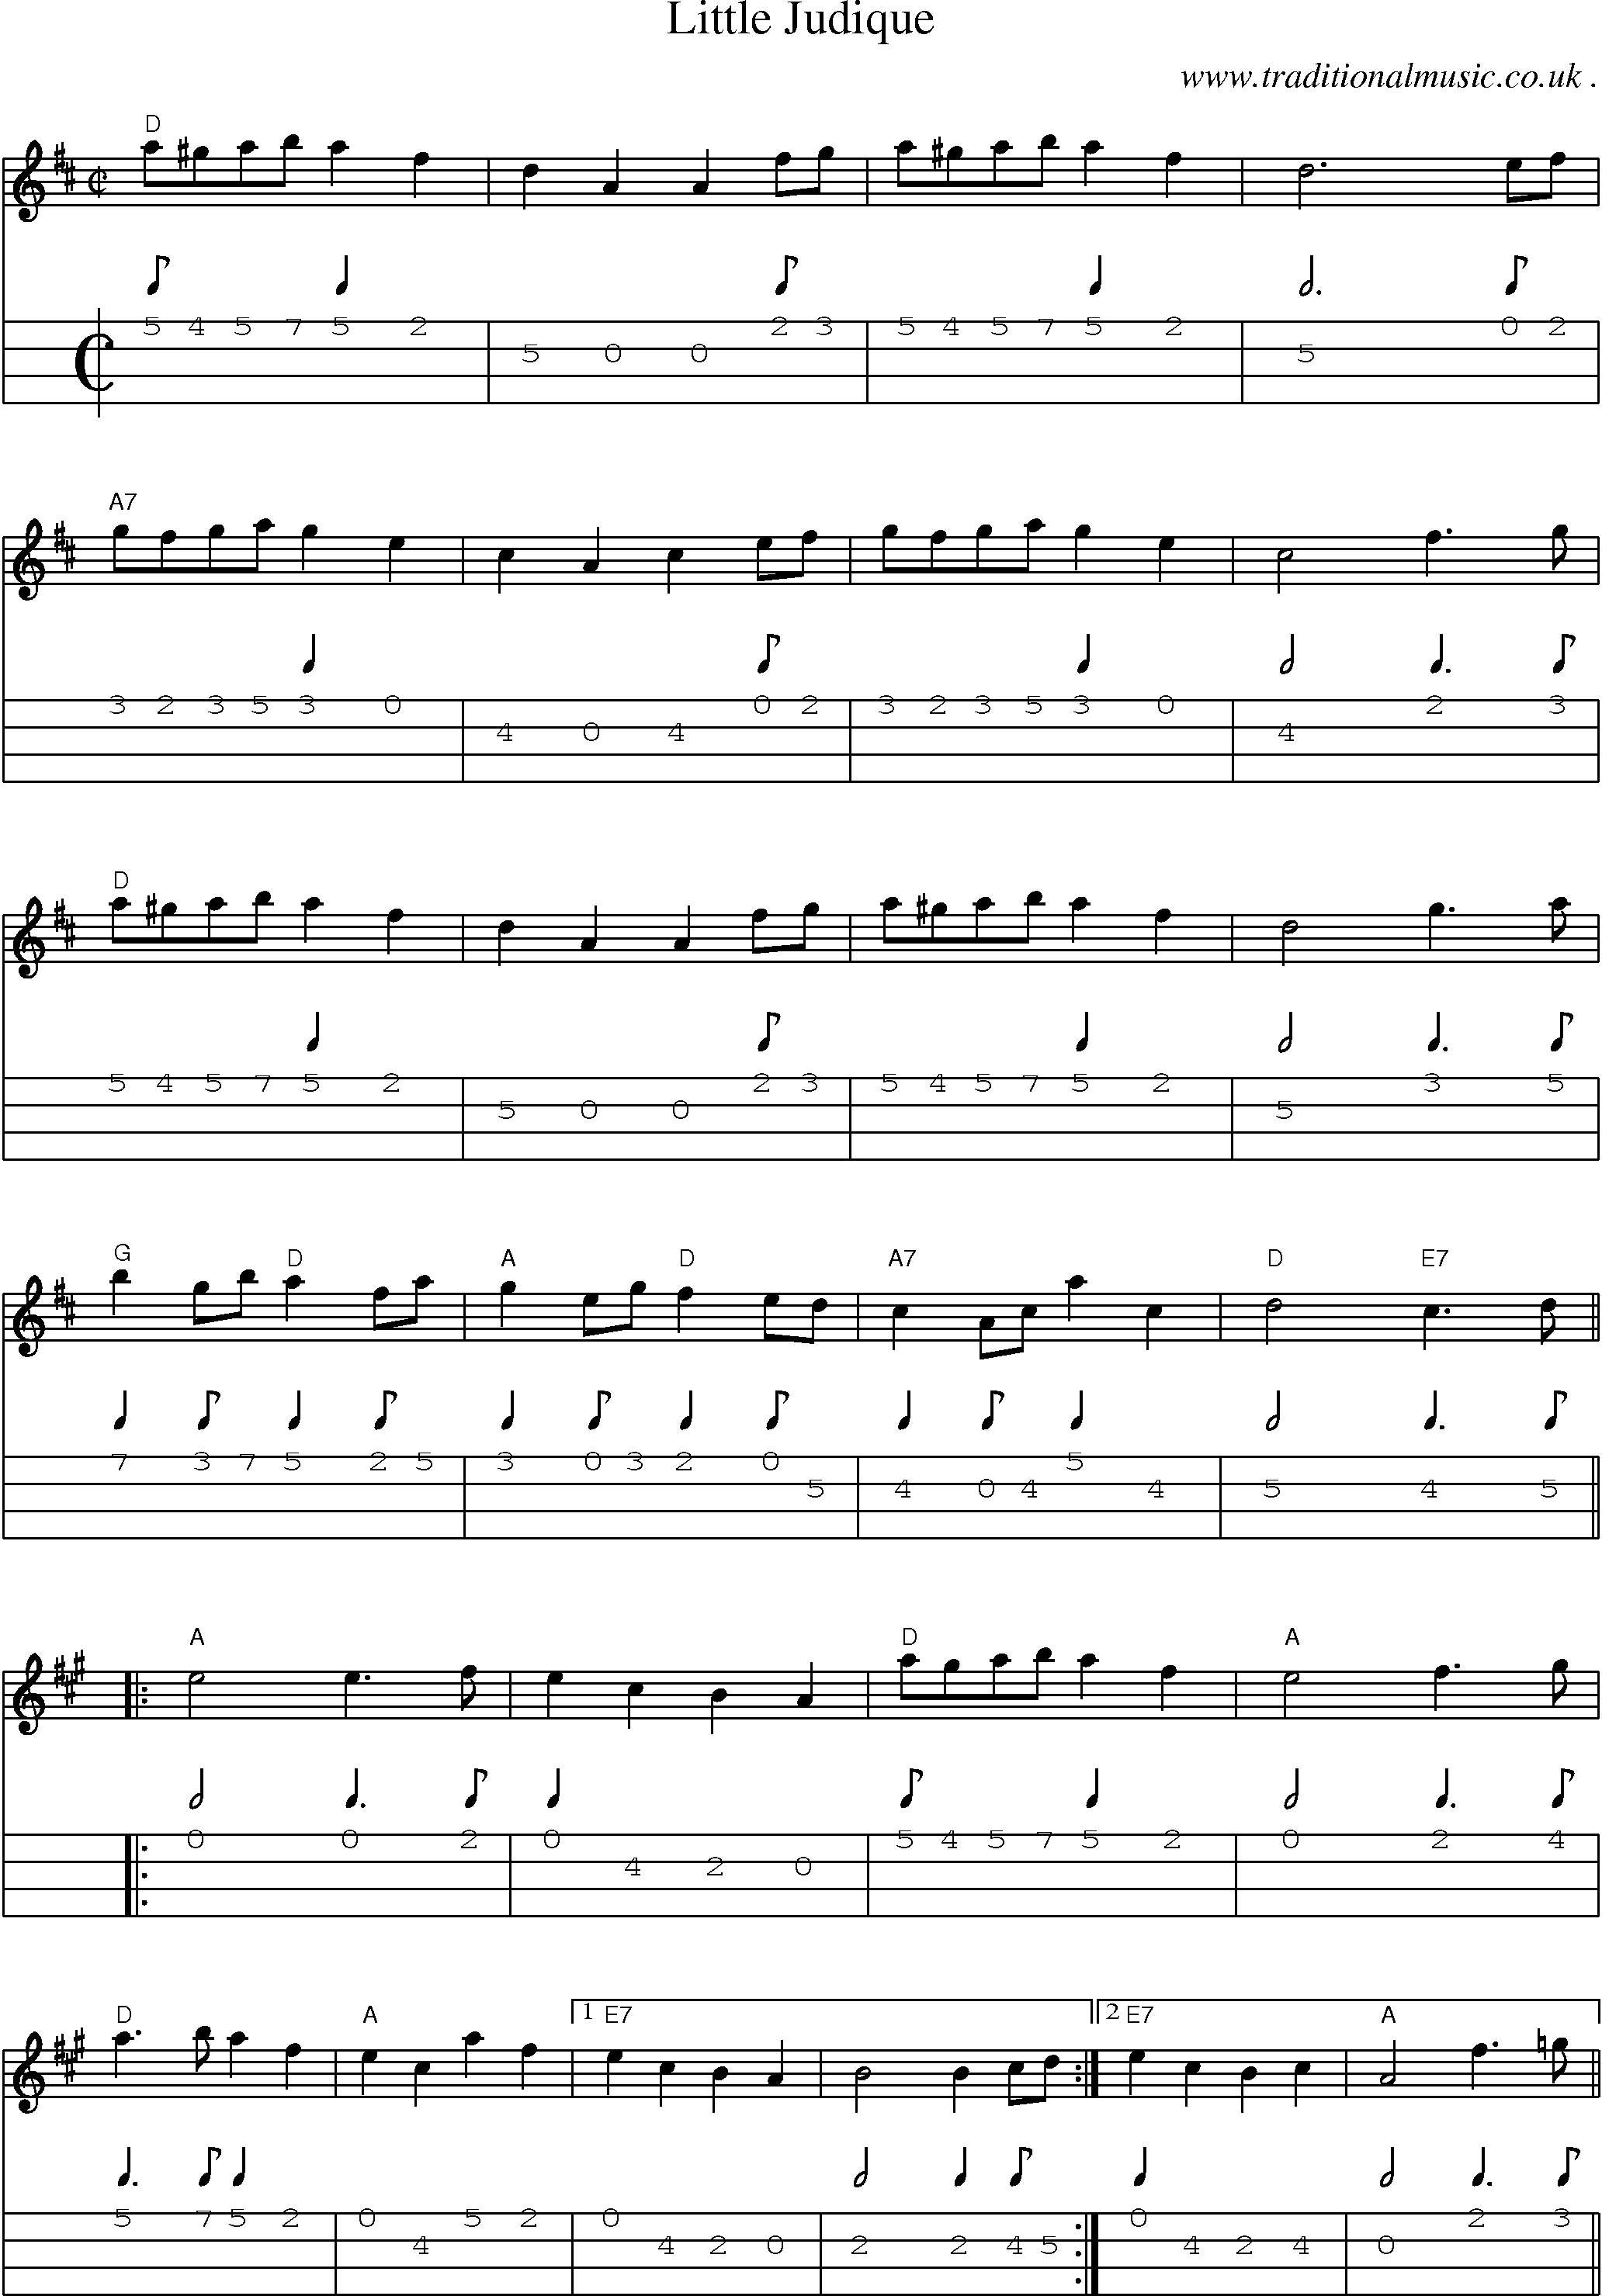 Music Score and Guitar Tabs for Little Judique